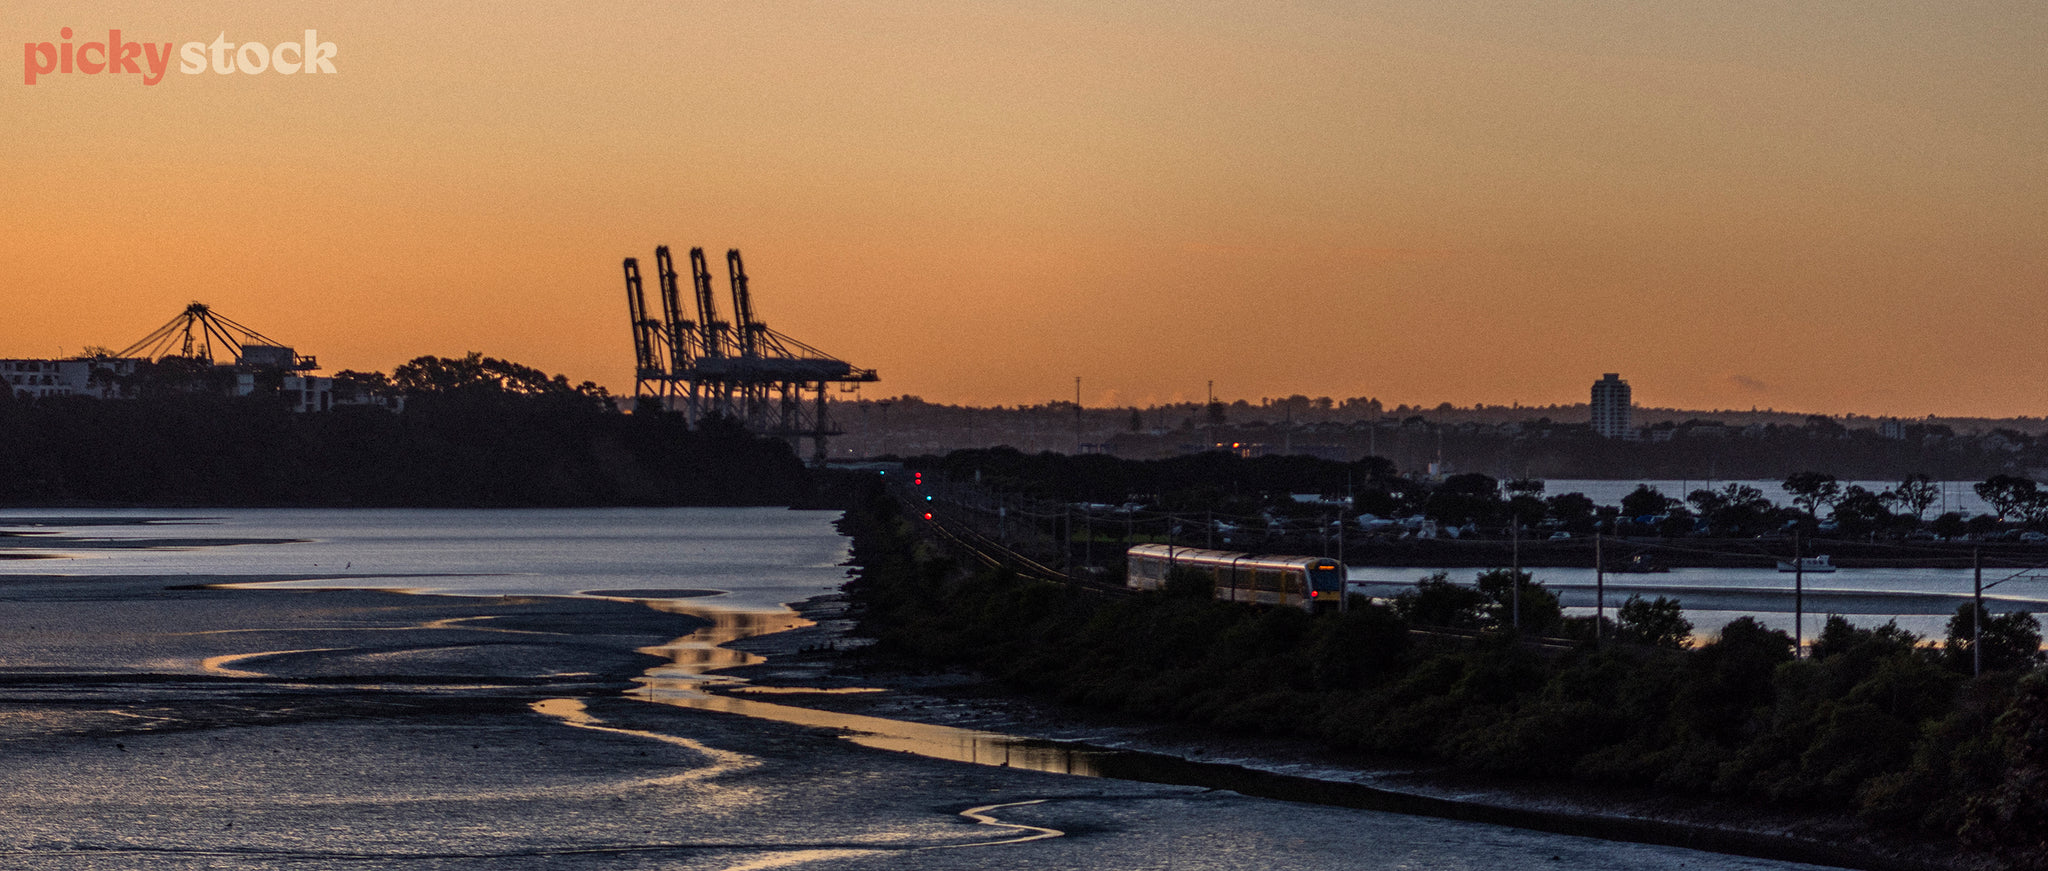 A train track cuts its way across a tidal esturary towards a port where 4 large container cranes sit idle.